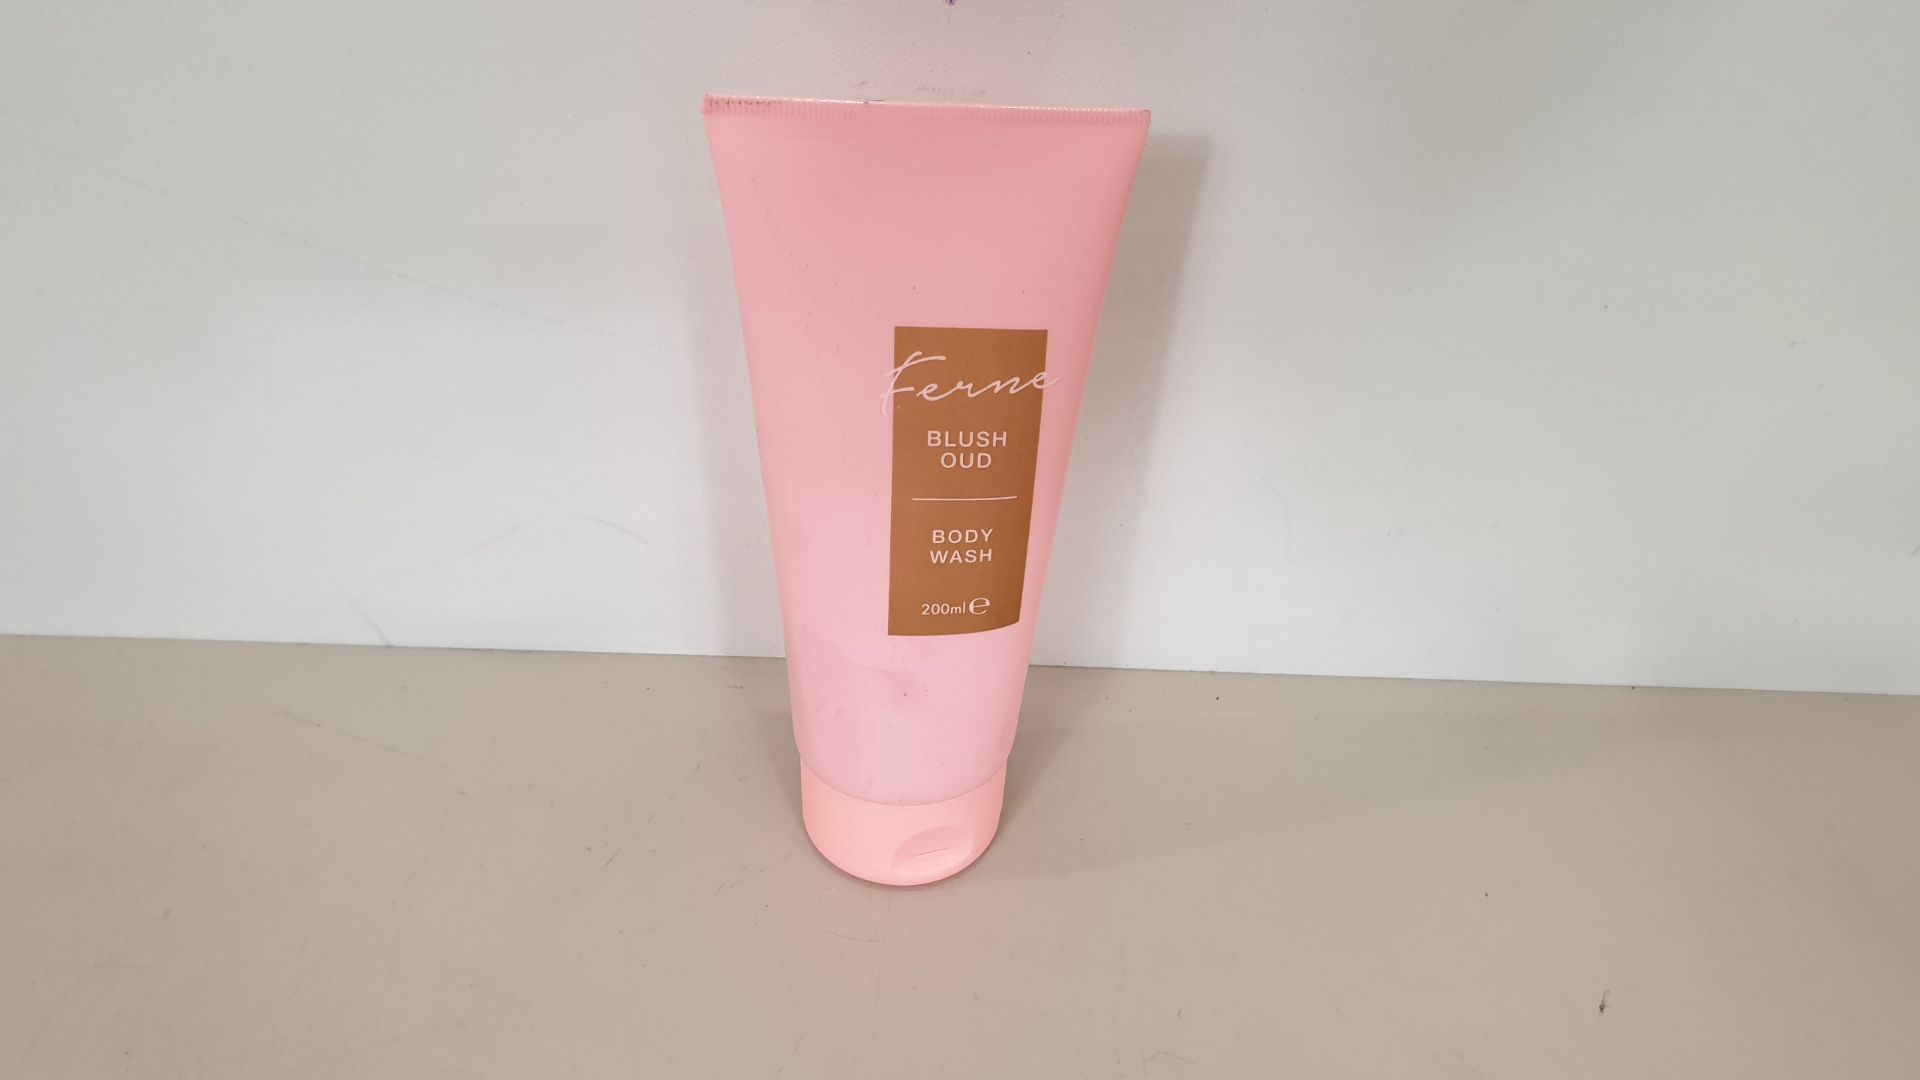 96 X BRAND NEW 200ML FERNE BLUSH OUD BODY WASH - IN ONE BOX (SOME PIECES POTENTIALLY LEAKED)